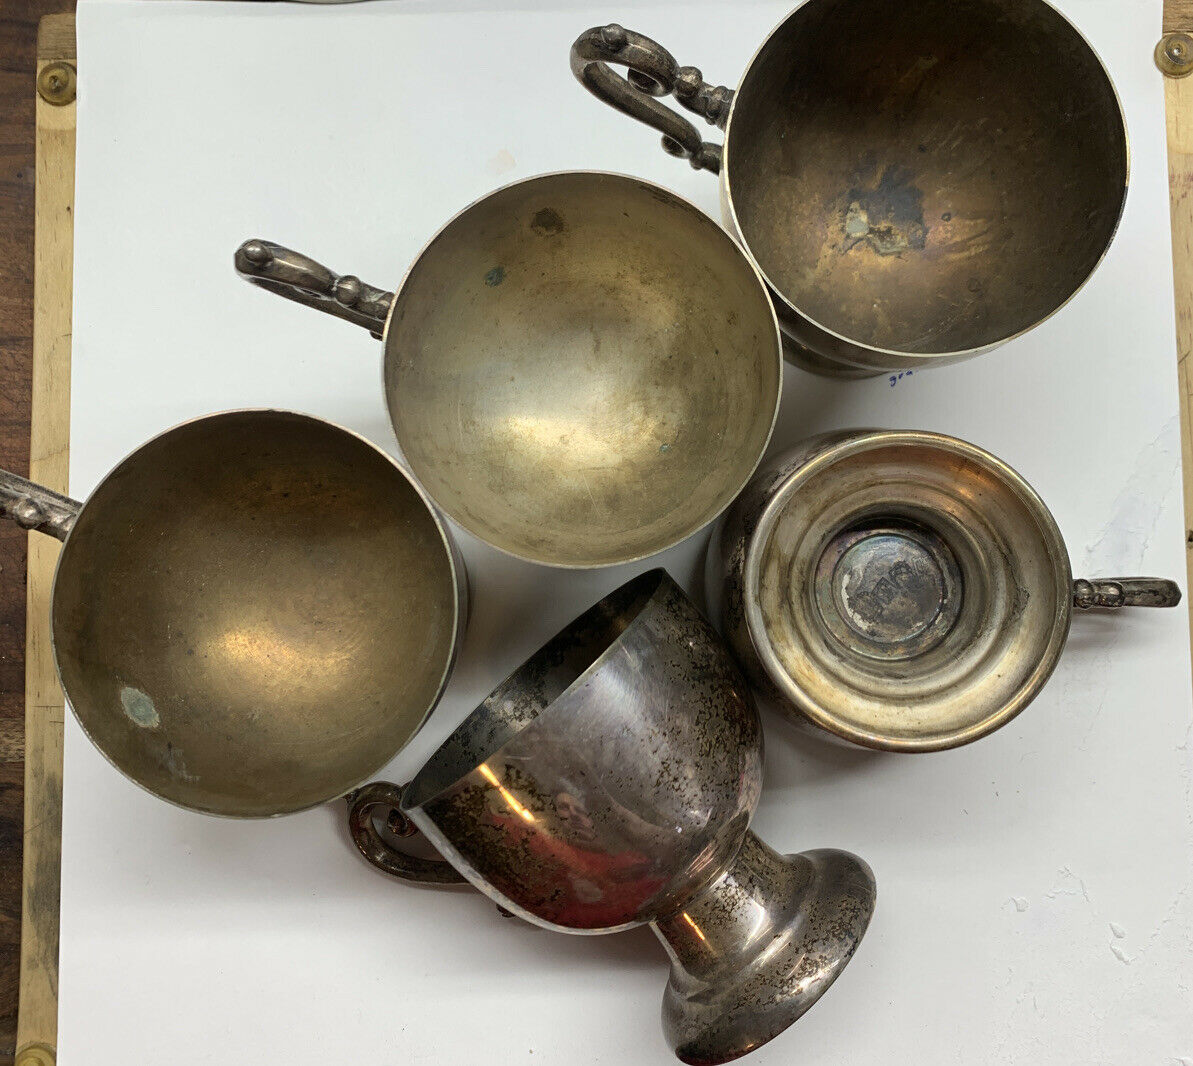 Silver Plate Mug, 5 Piece Matching   Vintage Silver Plate  —  In The S Lot